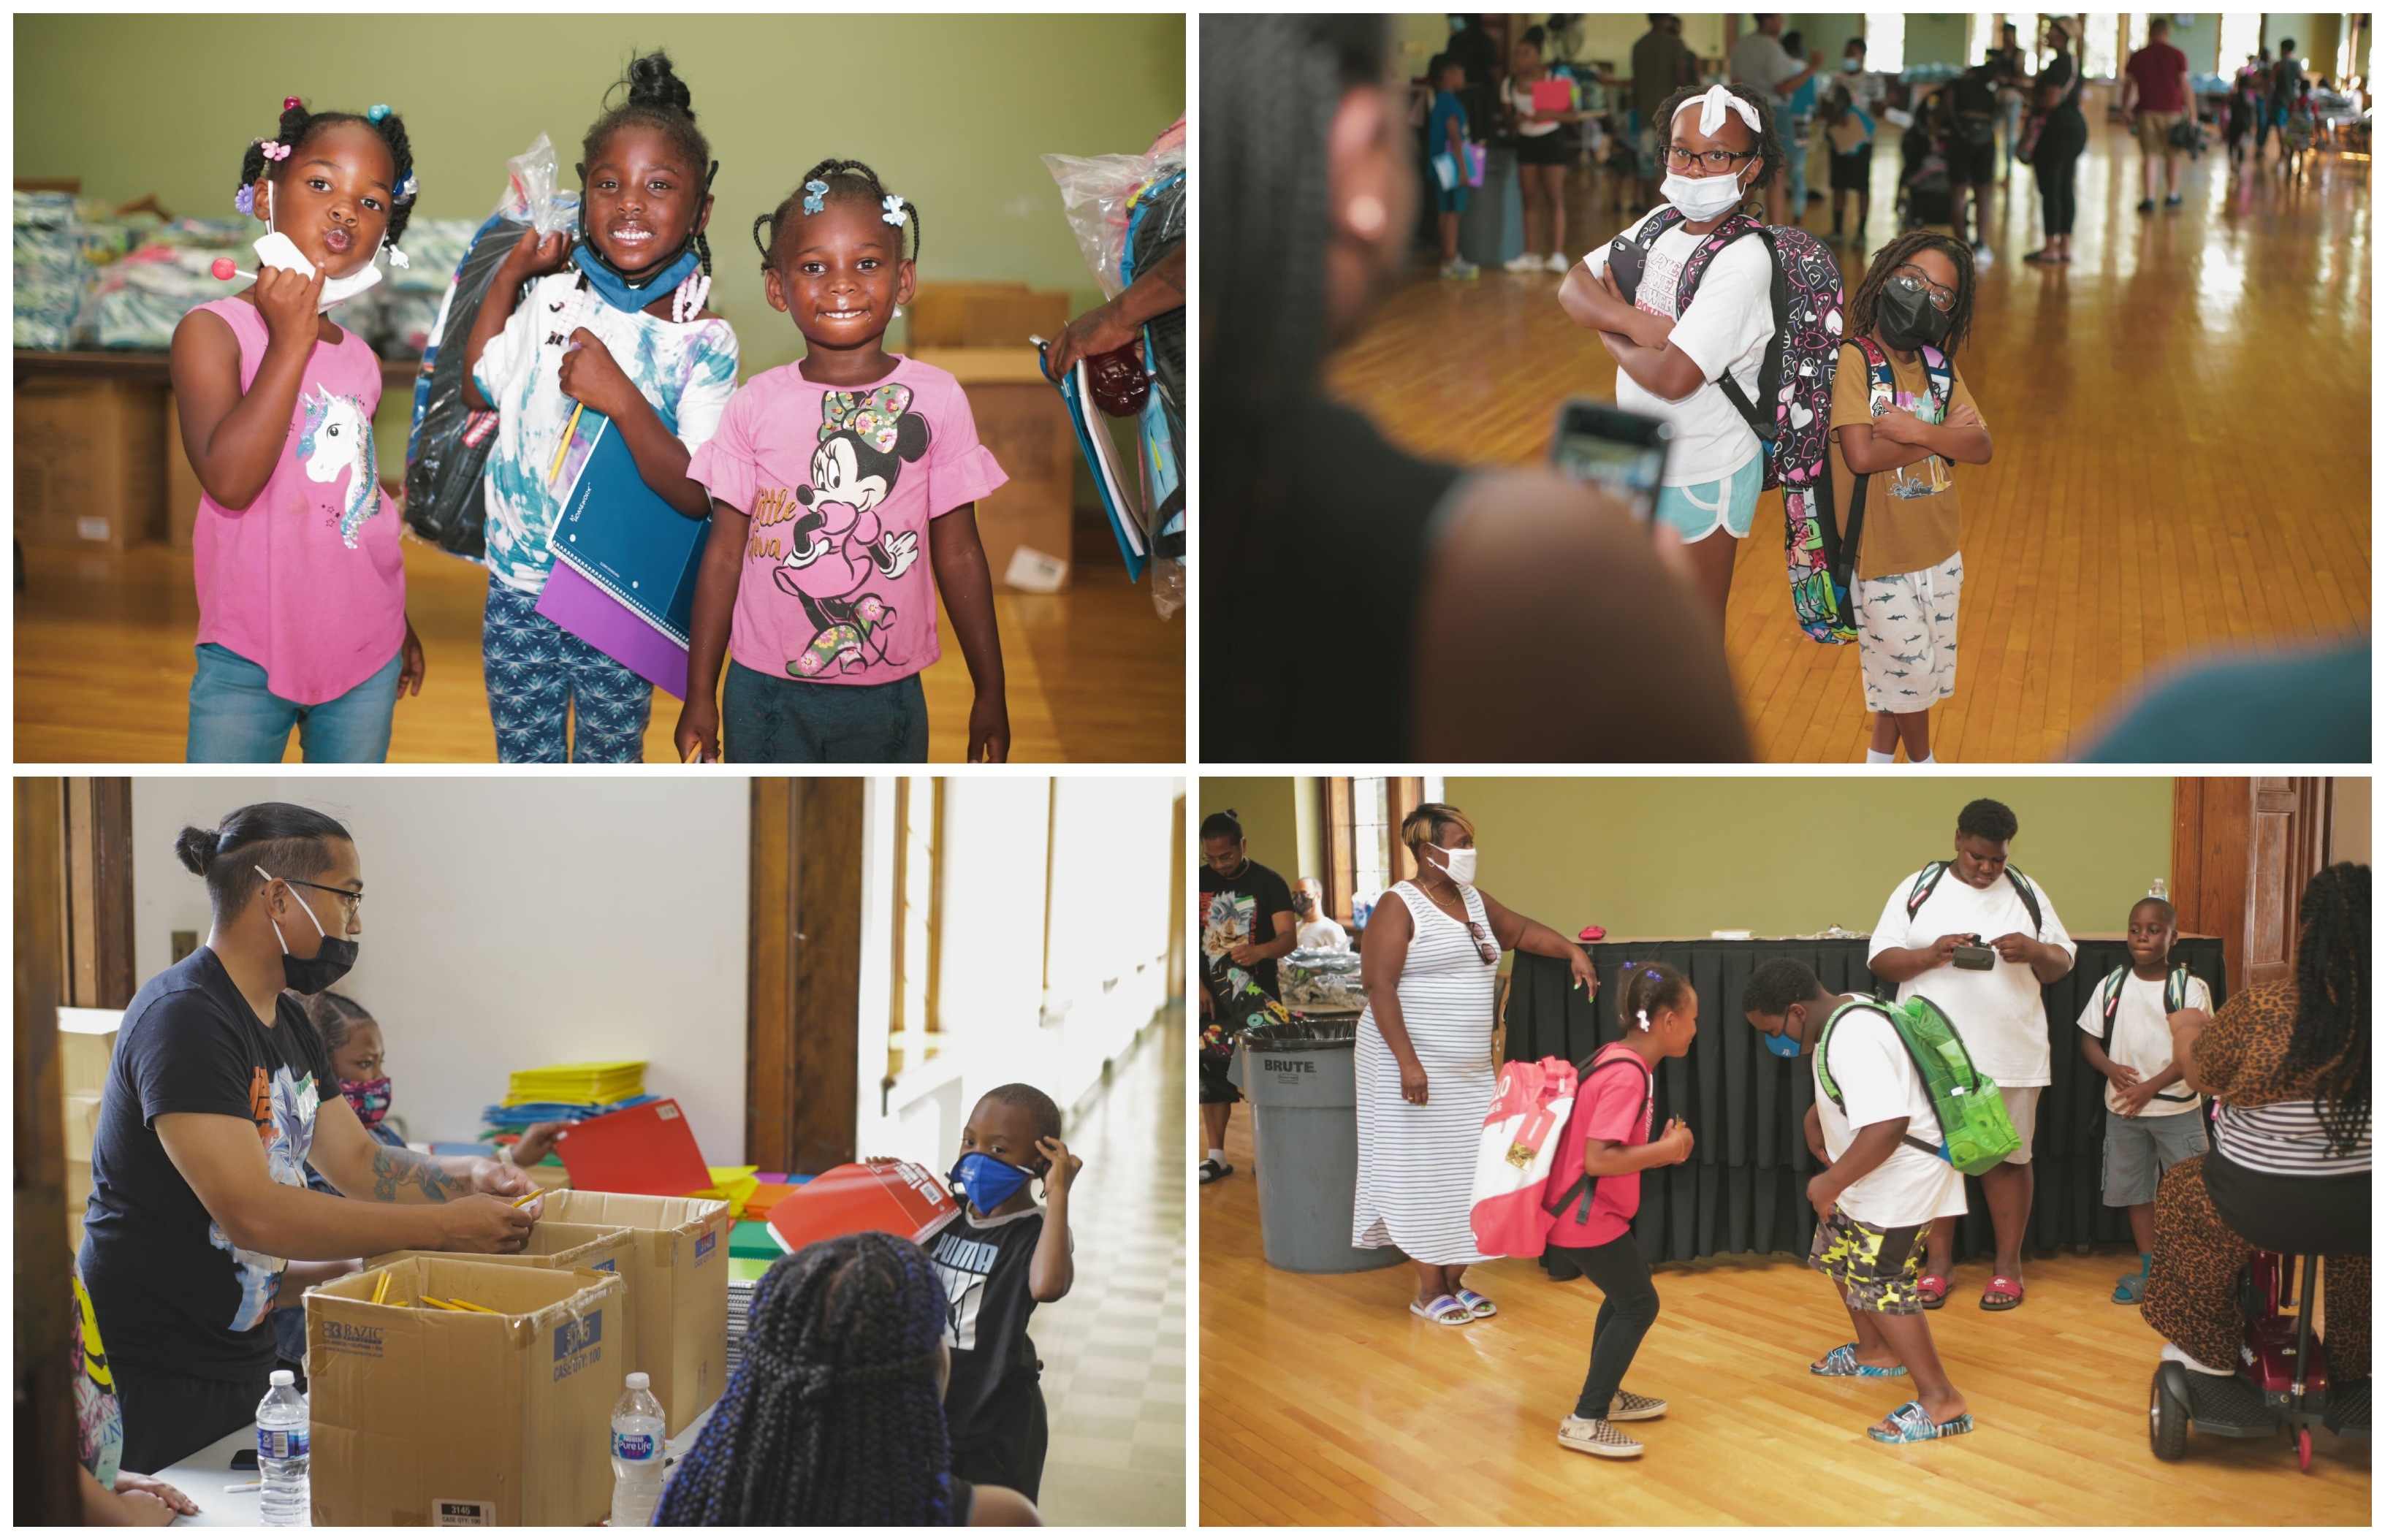 DVIDS - Images - MacBack to School Free Backpacks and Event Fair